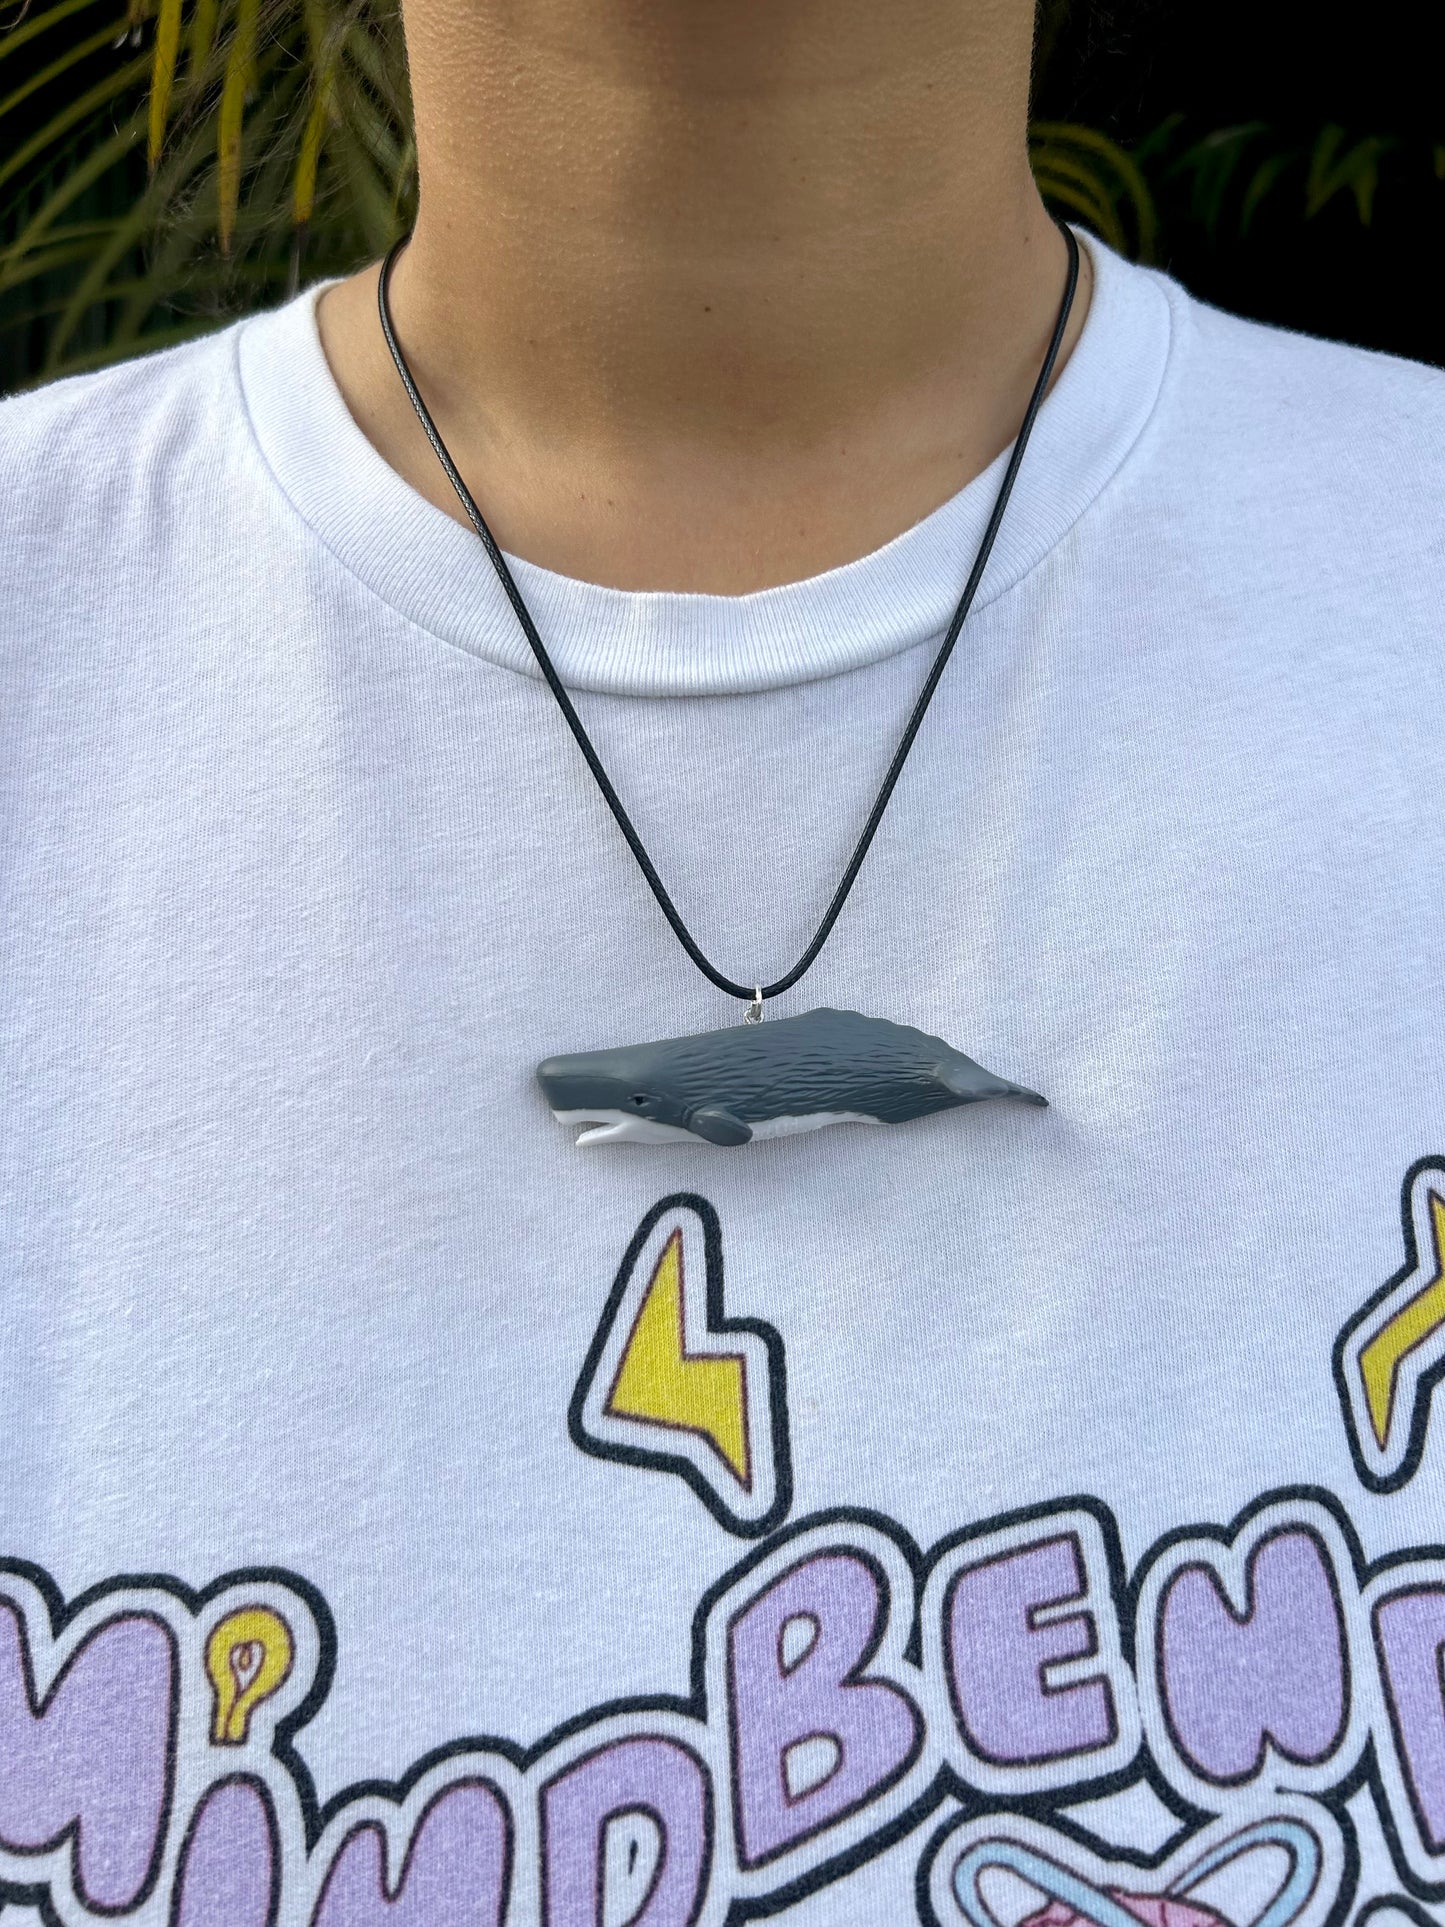 Grey Whale Necklace